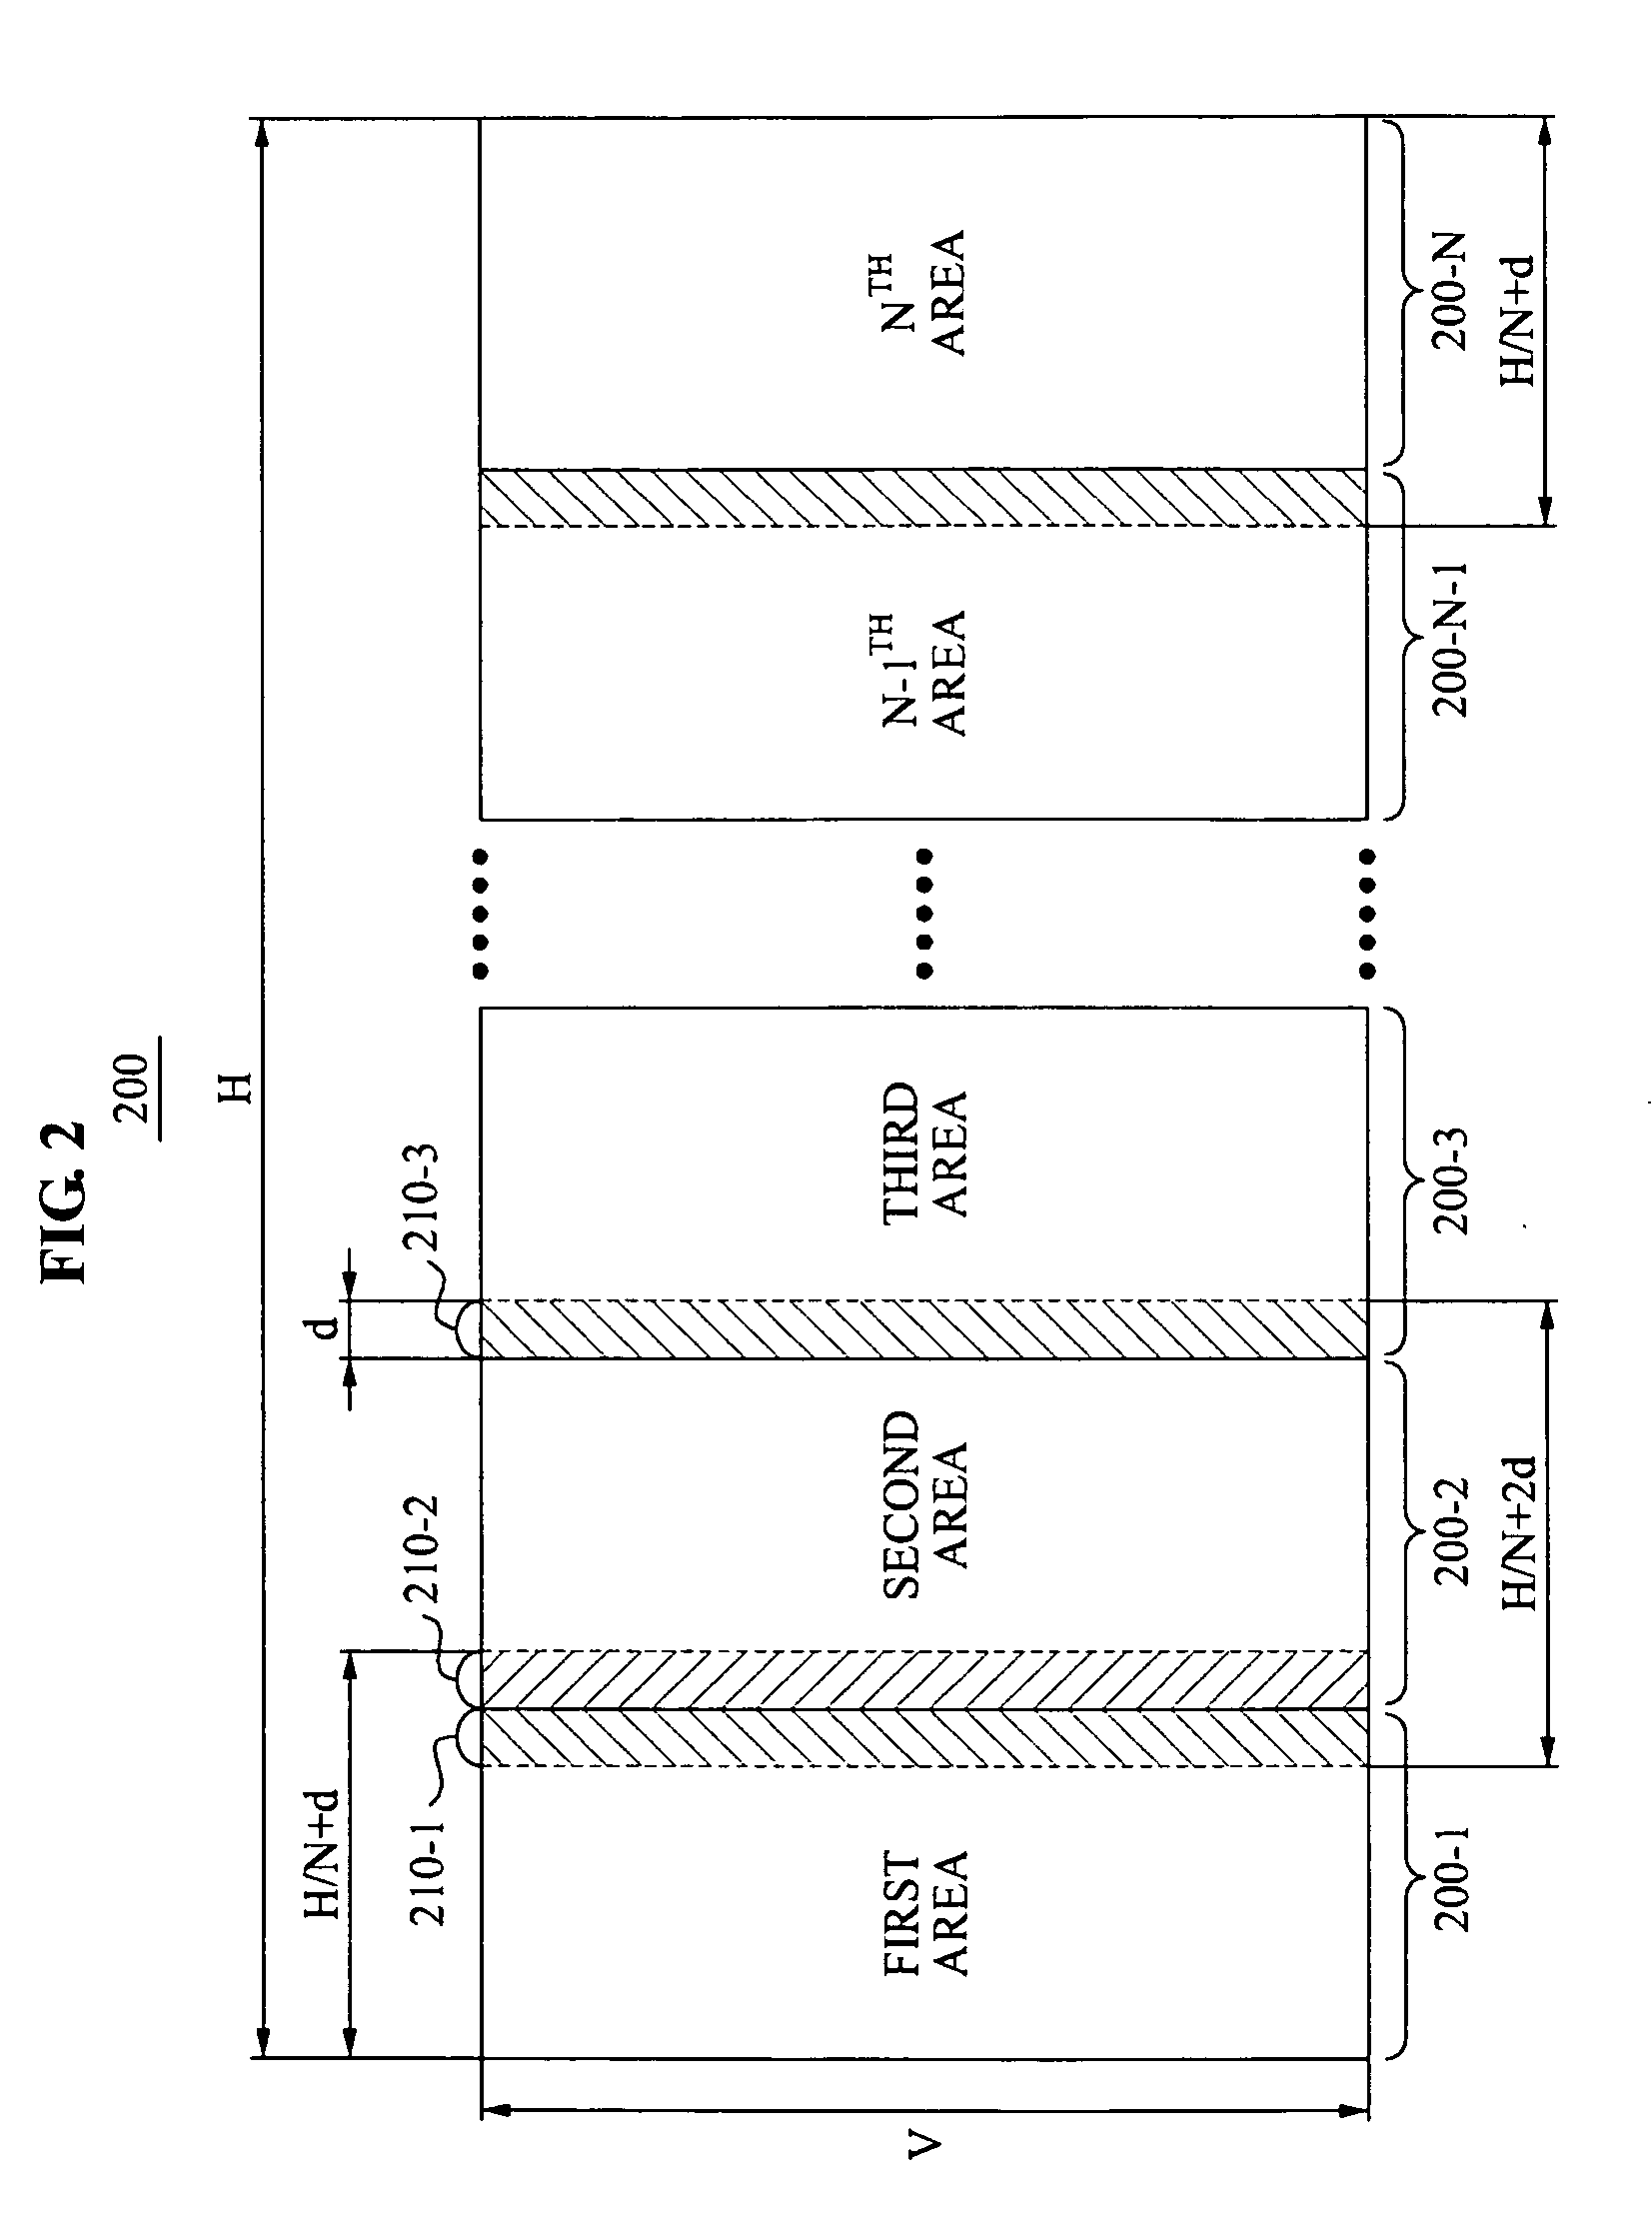 Apparatus and method for ultra-high resolution video processing